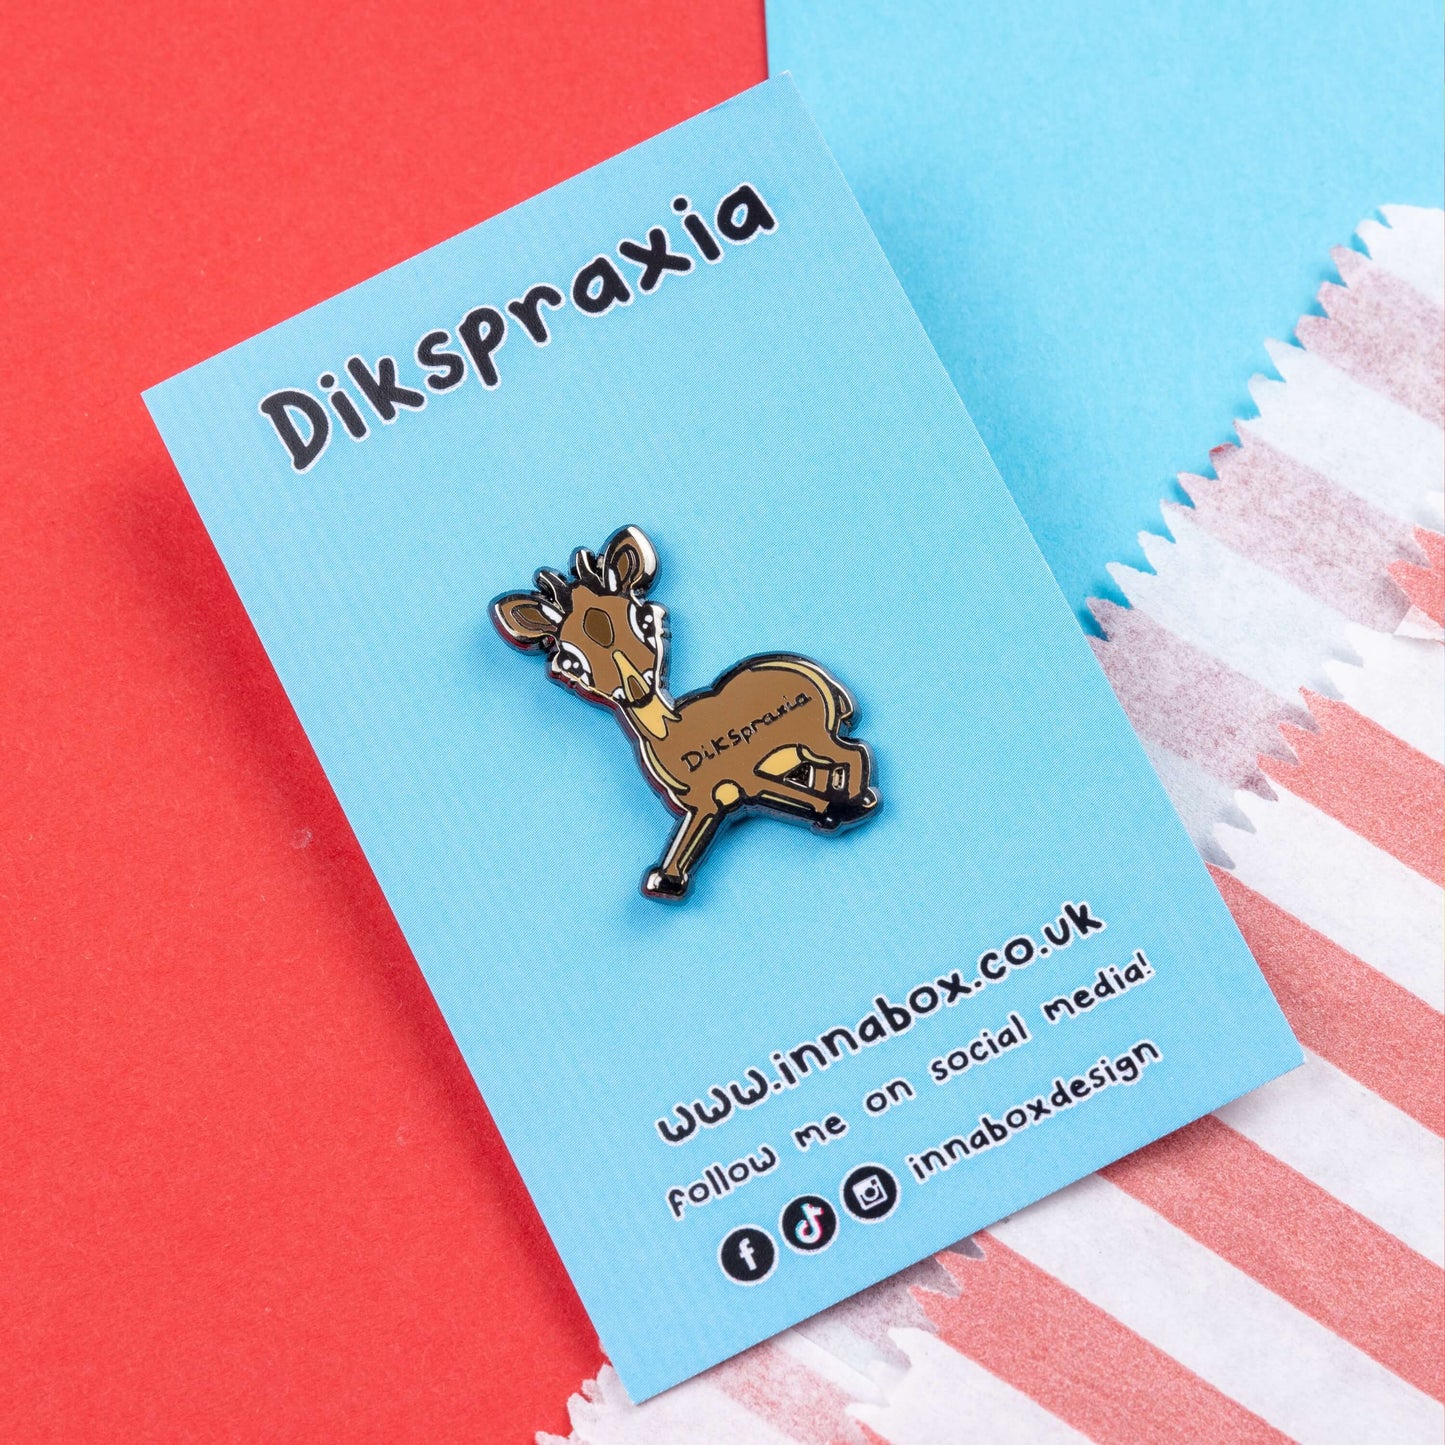 The Dikspraxia Enamel Pin - Dyspraxia on blue backing card laid on red and blue card. The brown dik dik antelope shaped enamel pin has its two front legs splayed chaotically with black text reading 'dikspraxia' across its middle. The design is raising awareness for dyspraxia and neurodivergence.